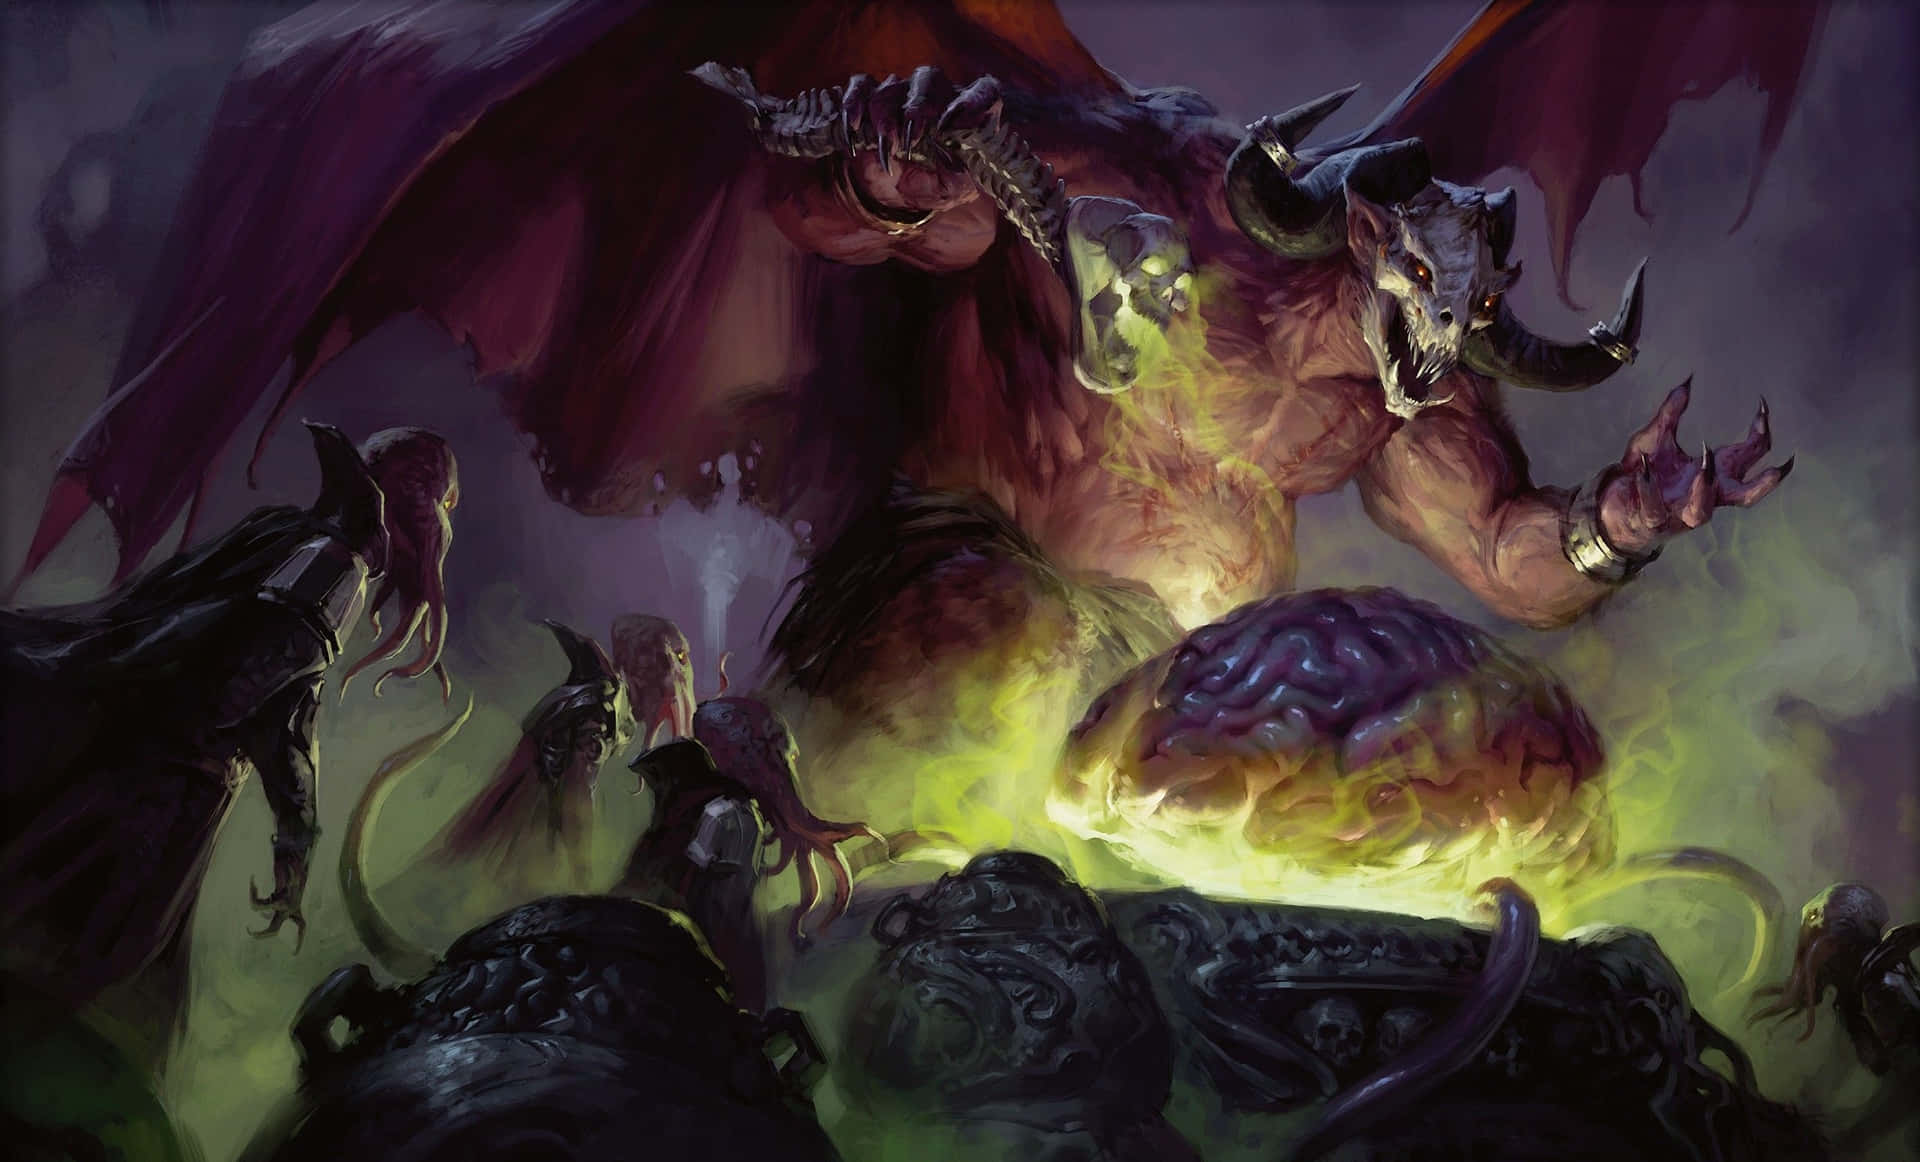 Epic Adventure Awaits in the World of Dungeons and Dragons